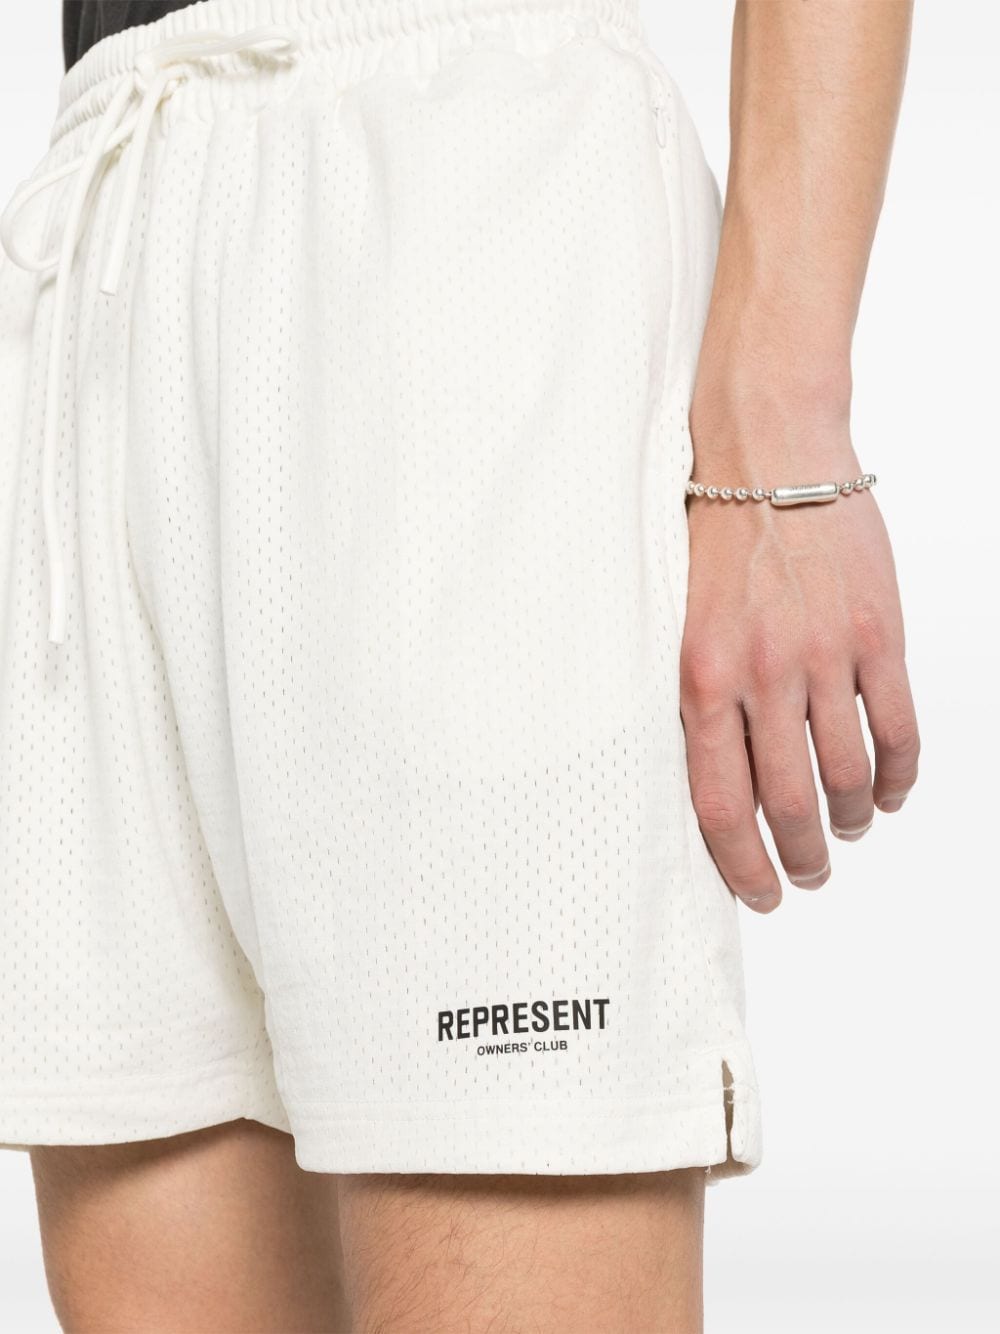 White shorts with perforated design